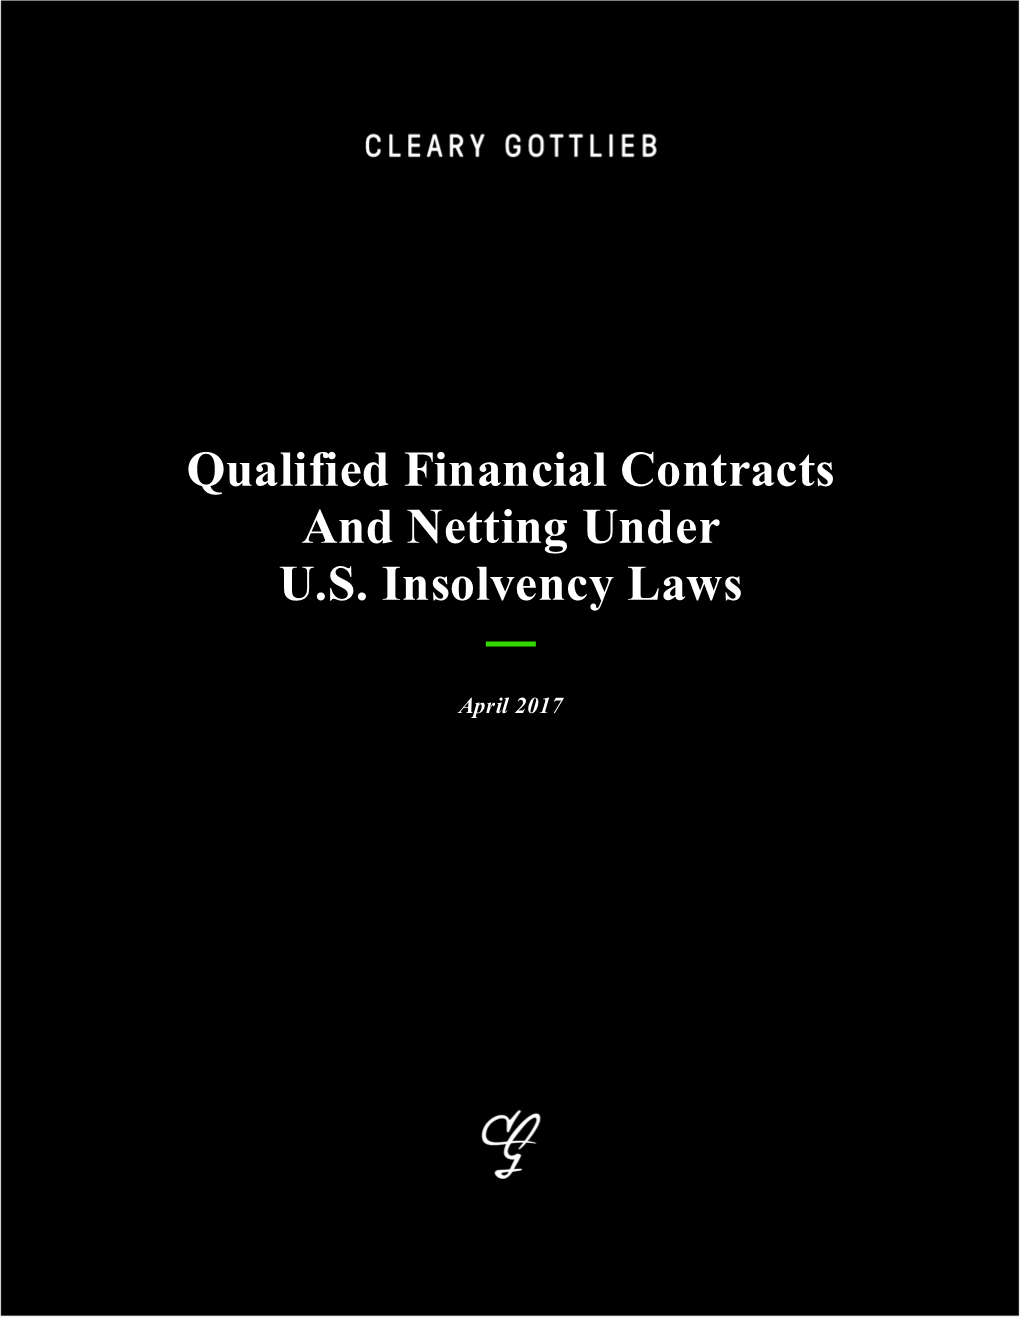 Qualified Financial Contracts and Netting Under U.S. Insolvency Laws —